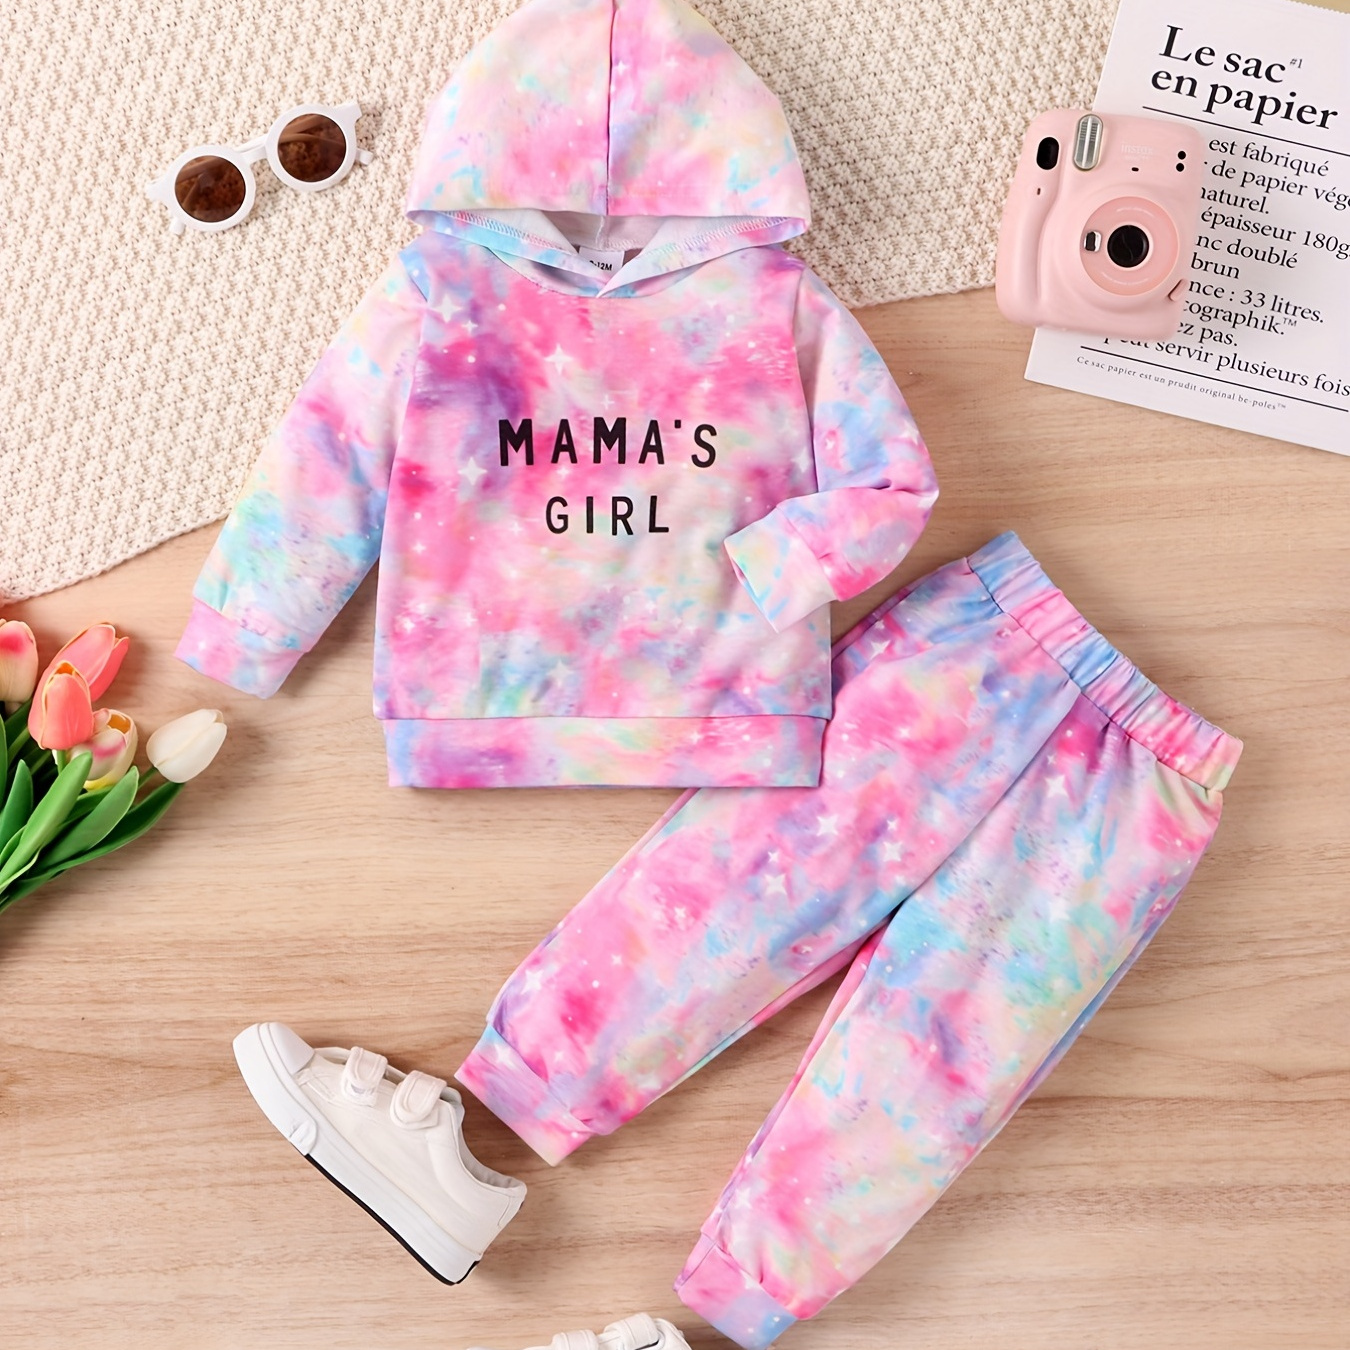 

2pcs Girl's Nebula Tie-dye Outfit, Sweatshirt & Sweatpants Set, Mama' Girl Print Long Sleeve Top, Toddler Kid's Clothes For Spring Fall Winter